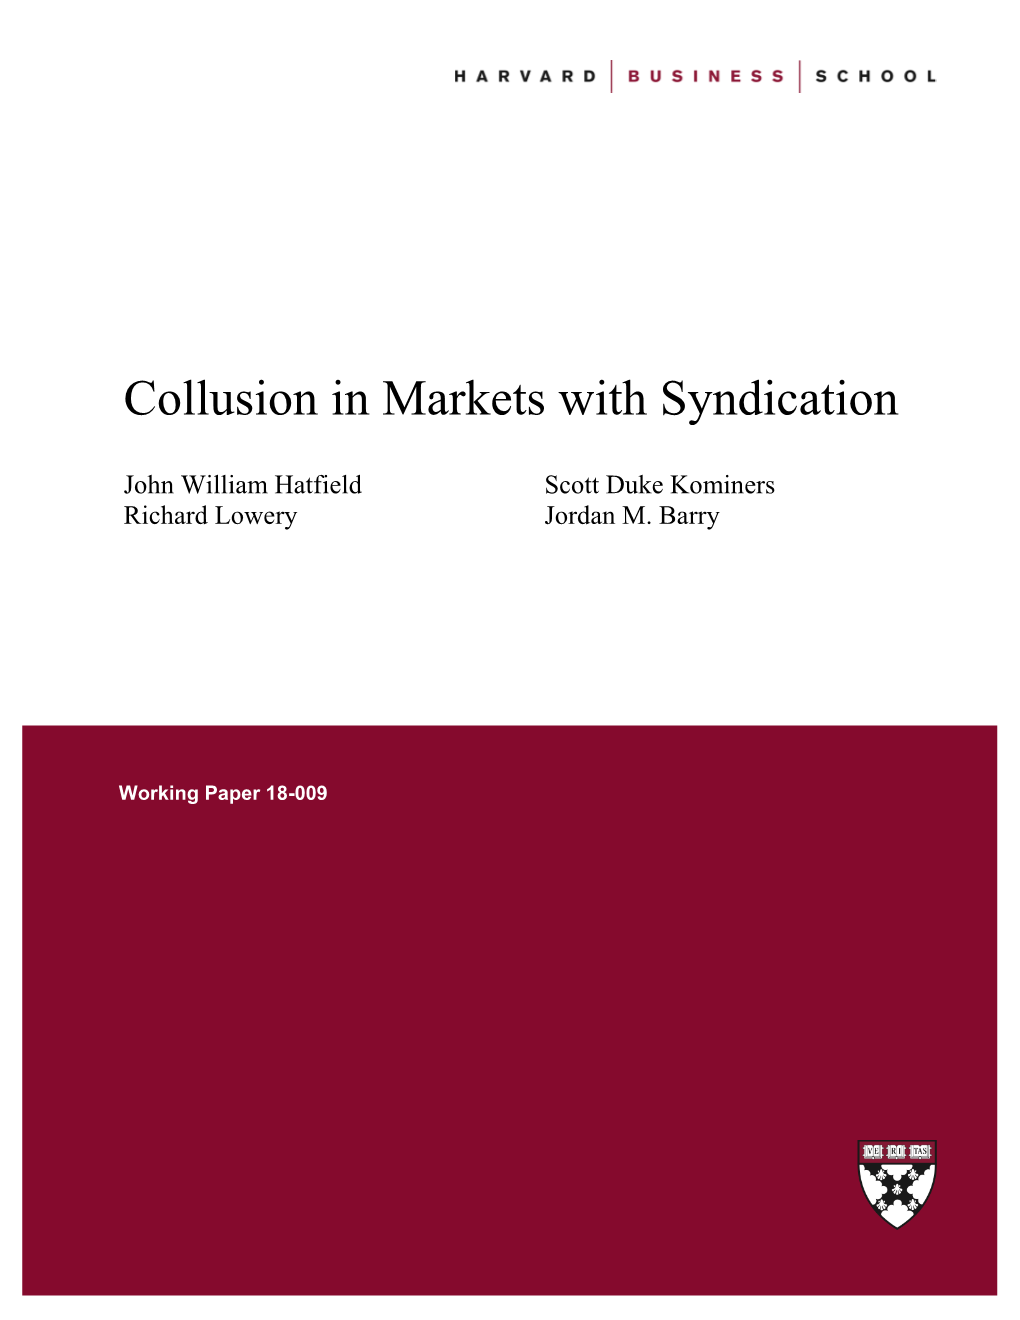 Collusion in Markets with Syndication